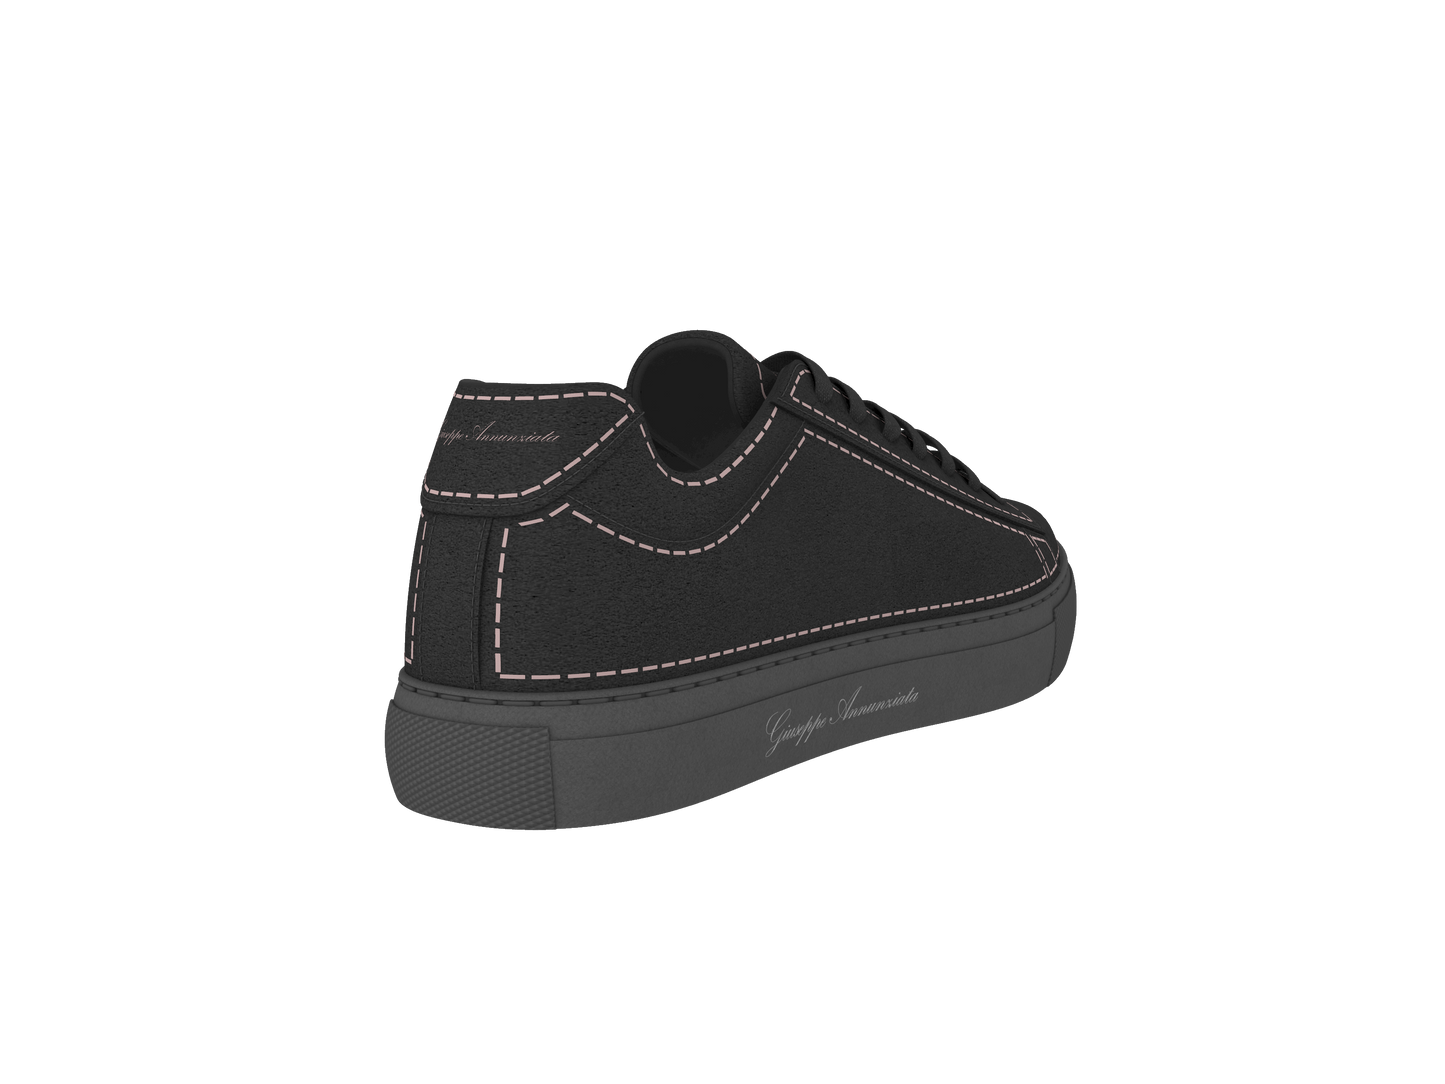 Suede Stitches Sneaker Black and Pale pink